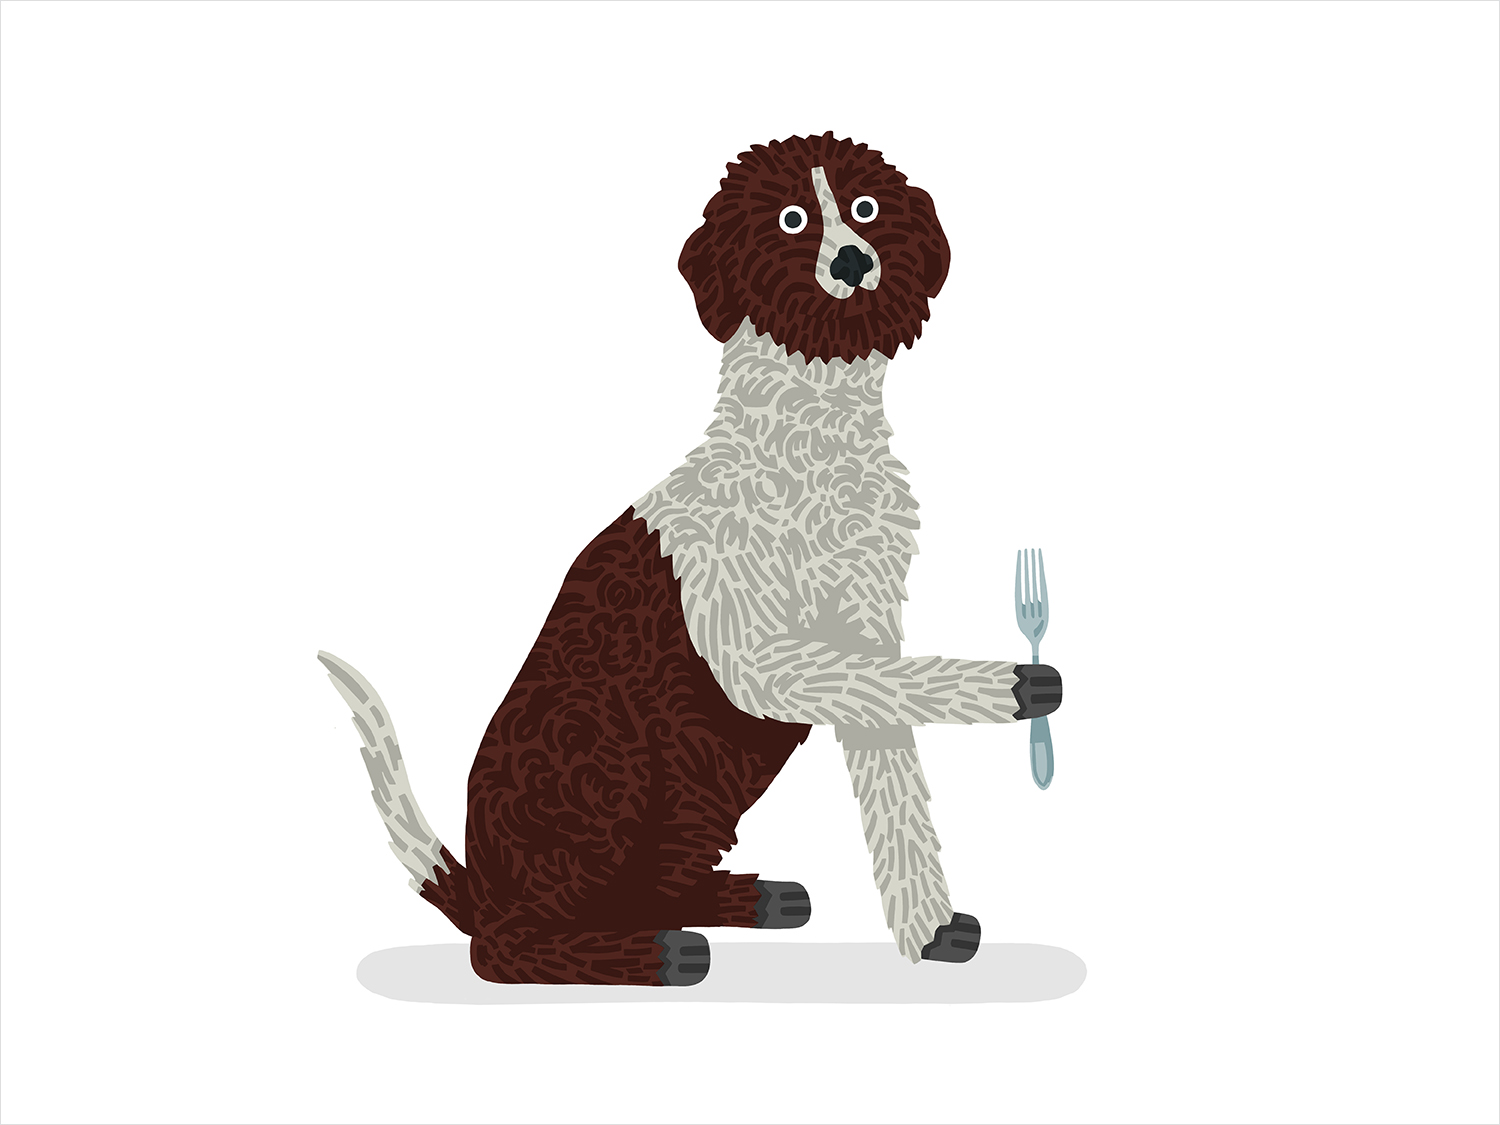 Illustration by Ted Parker commissioned by Studio Hi Ho for restaurant and food store Lagotto